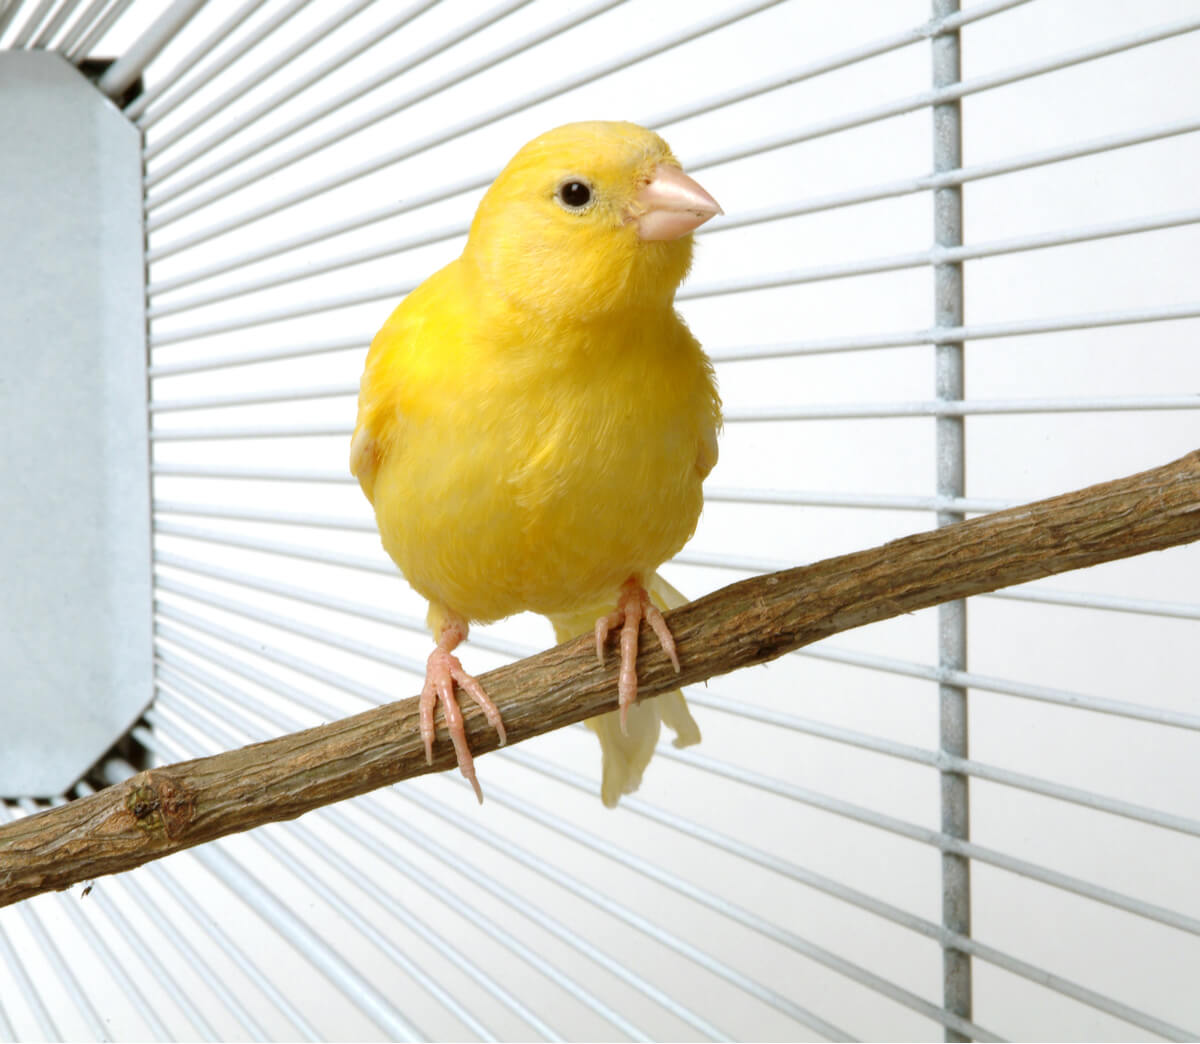 Why are my canary's feathers falling out?